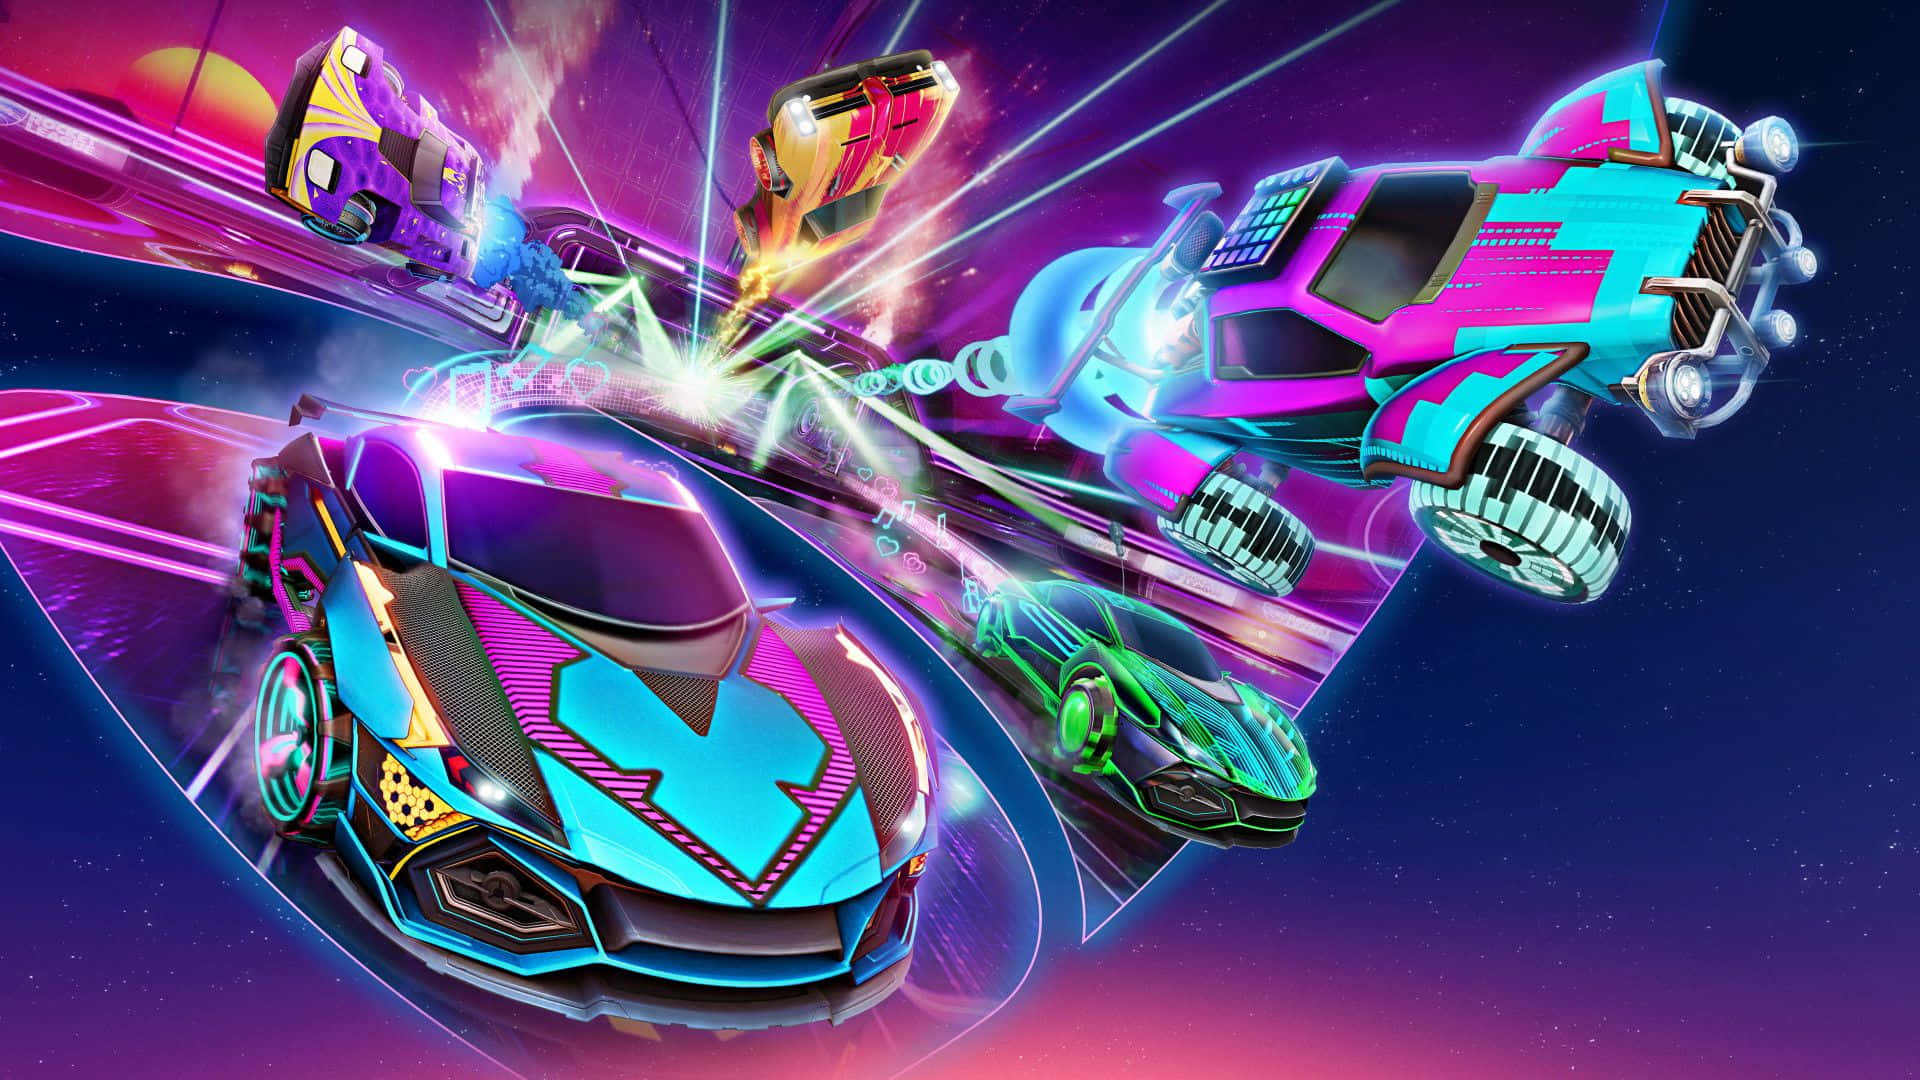 A Colorful Image Of A Racing Game With Cars Flying Around Wallpaper